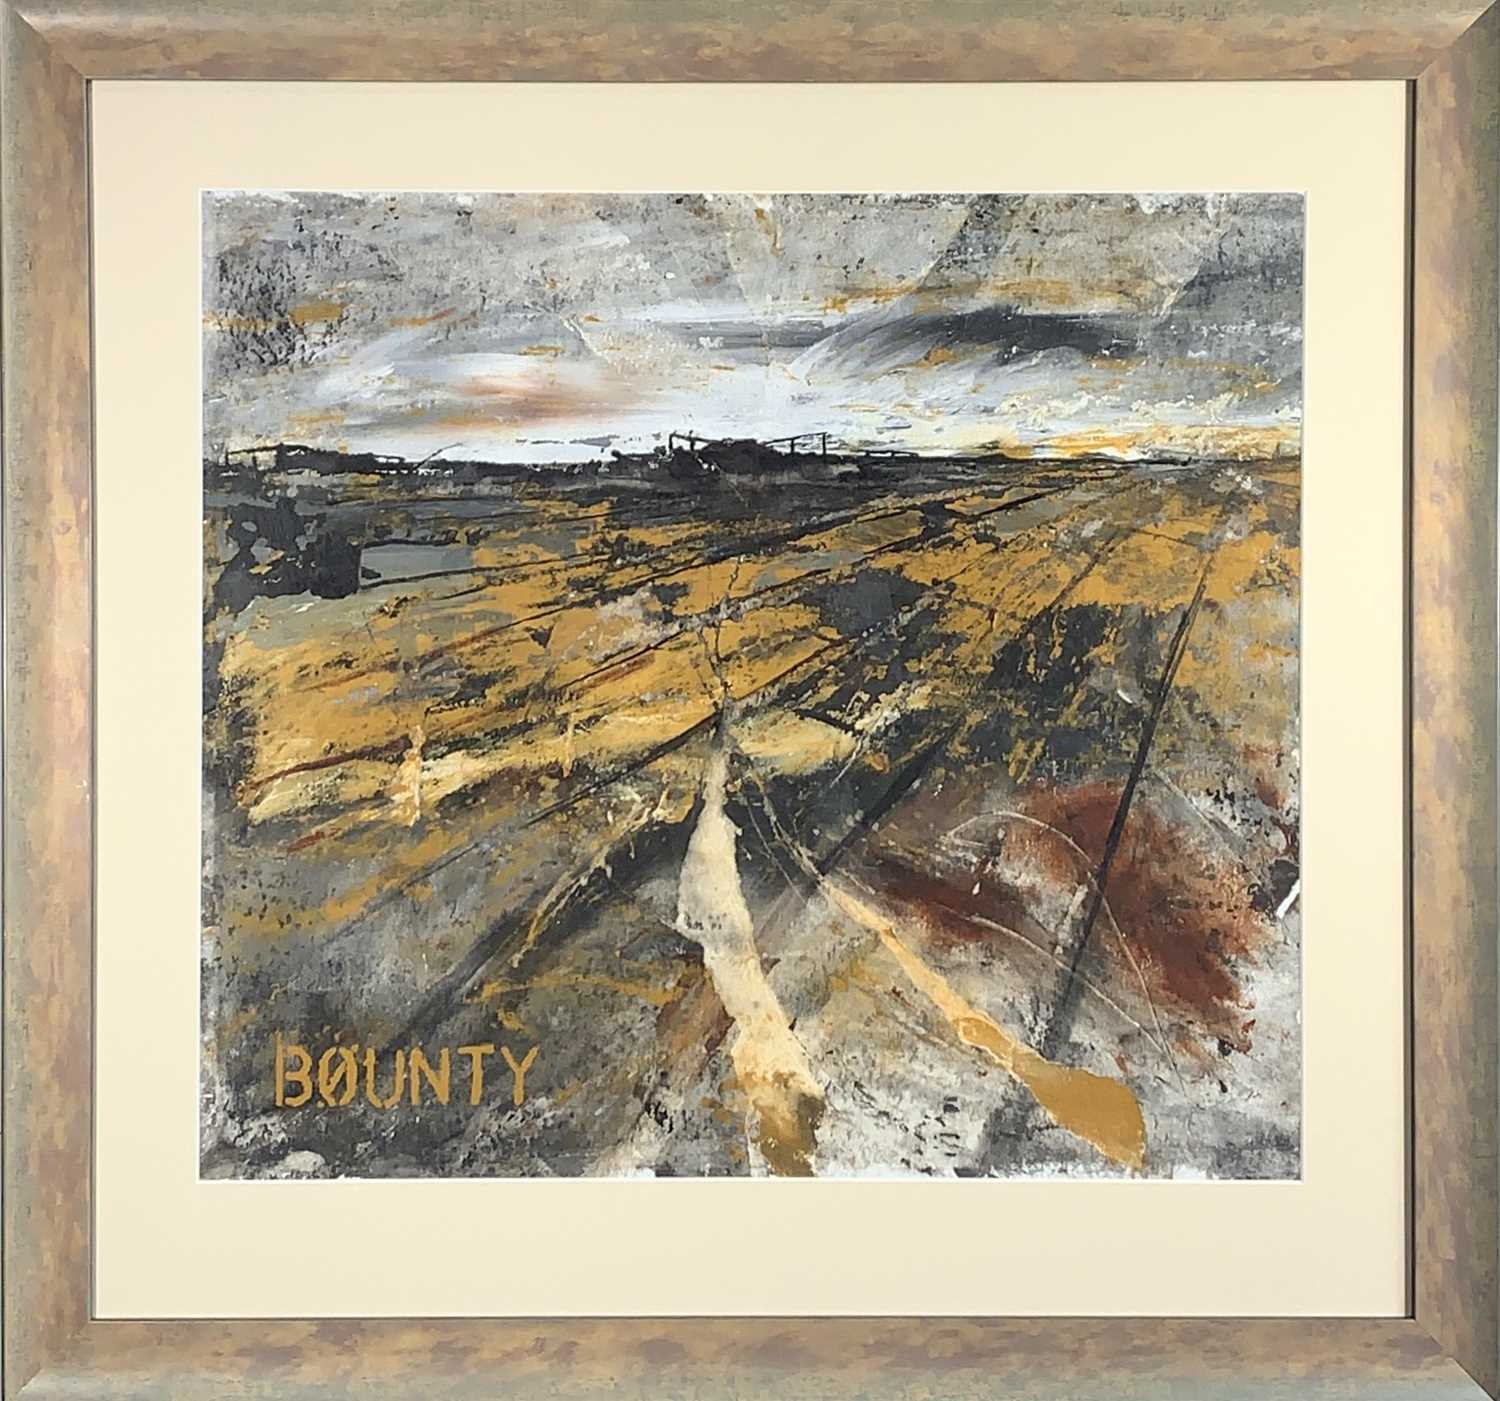 Phil WHITING Bounty - Wheal JaneMixed media Signed 53 x 59cm - Image 2 of 2